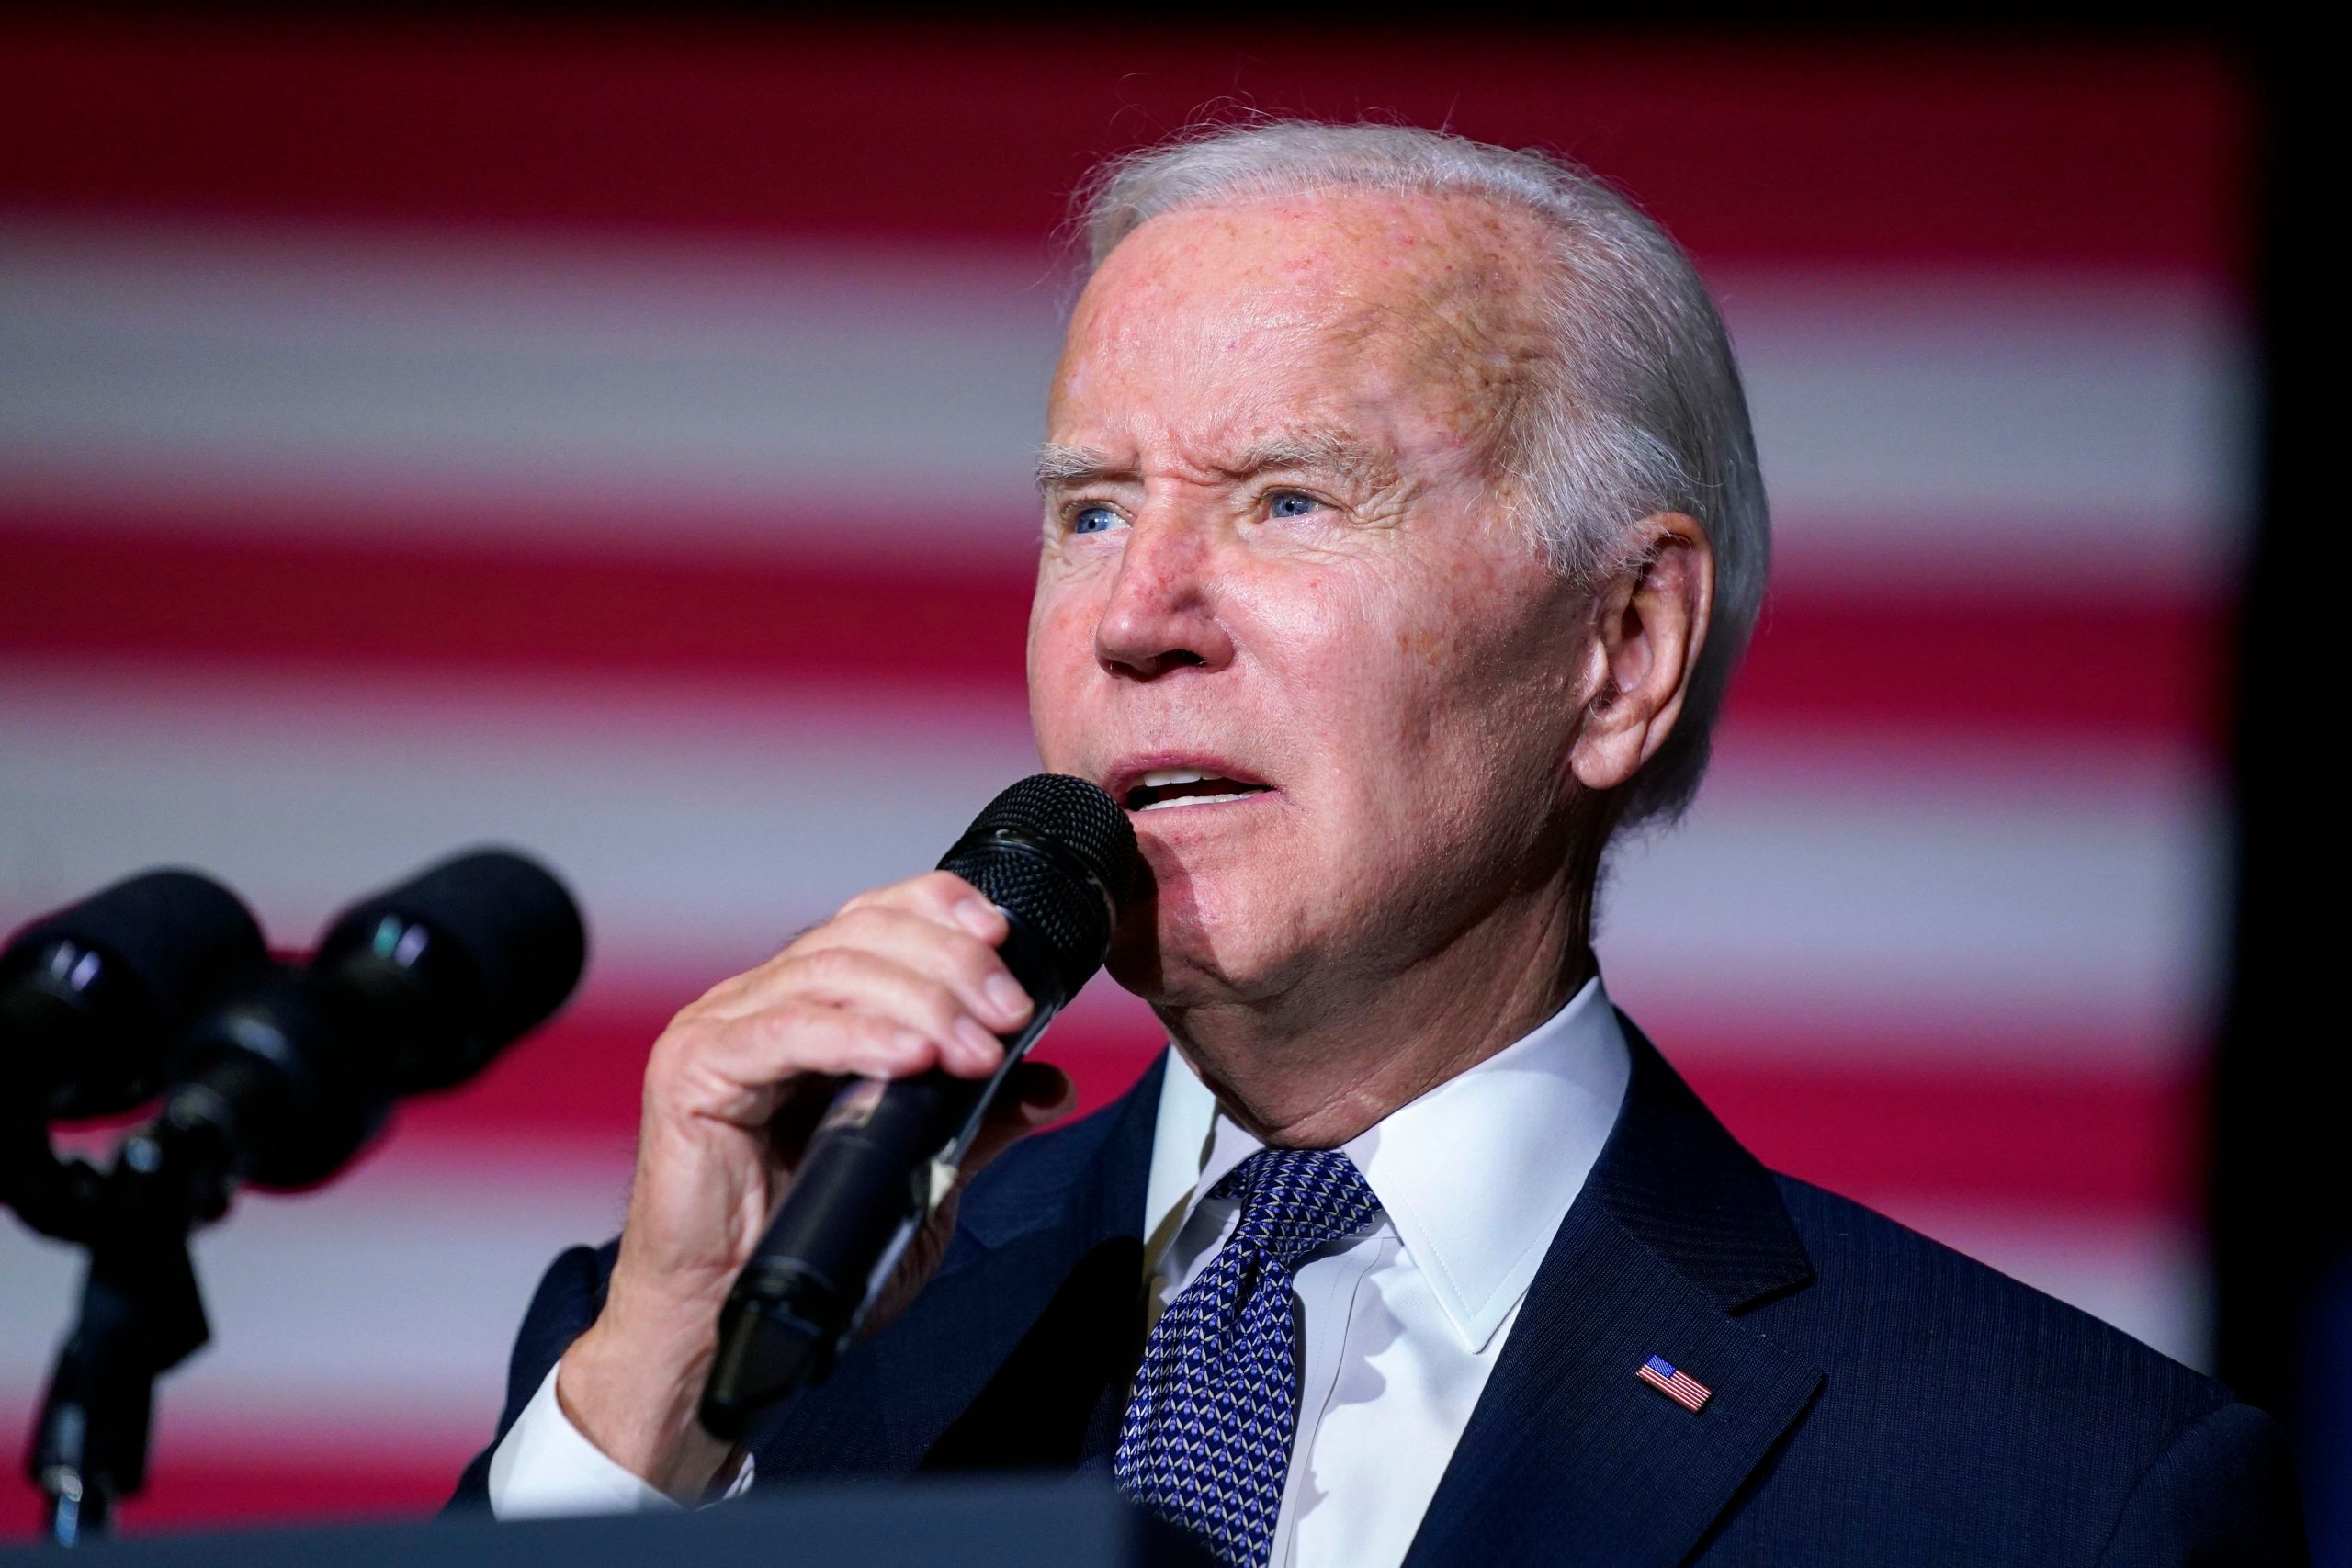 Russia bans entry of Joe Biden’s siblings along with 200 other US citizens